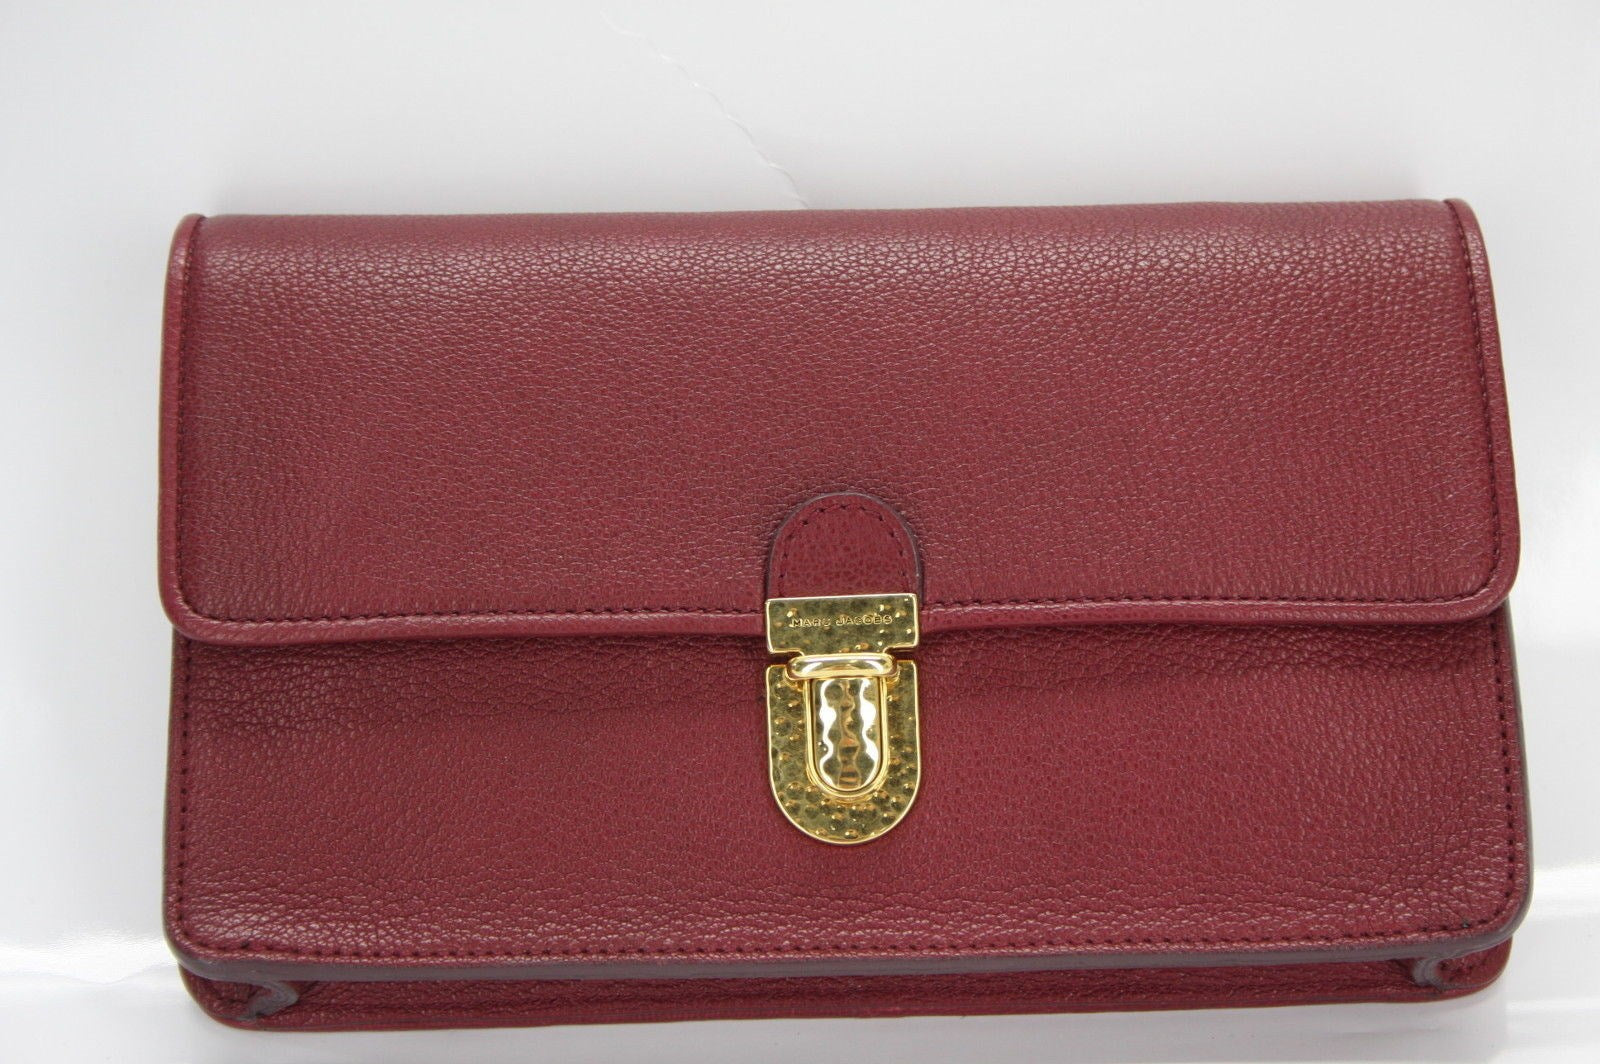 Marc Jacobs Leather Venetia Push Lock Front Clutch Bag $495 New Small Purse